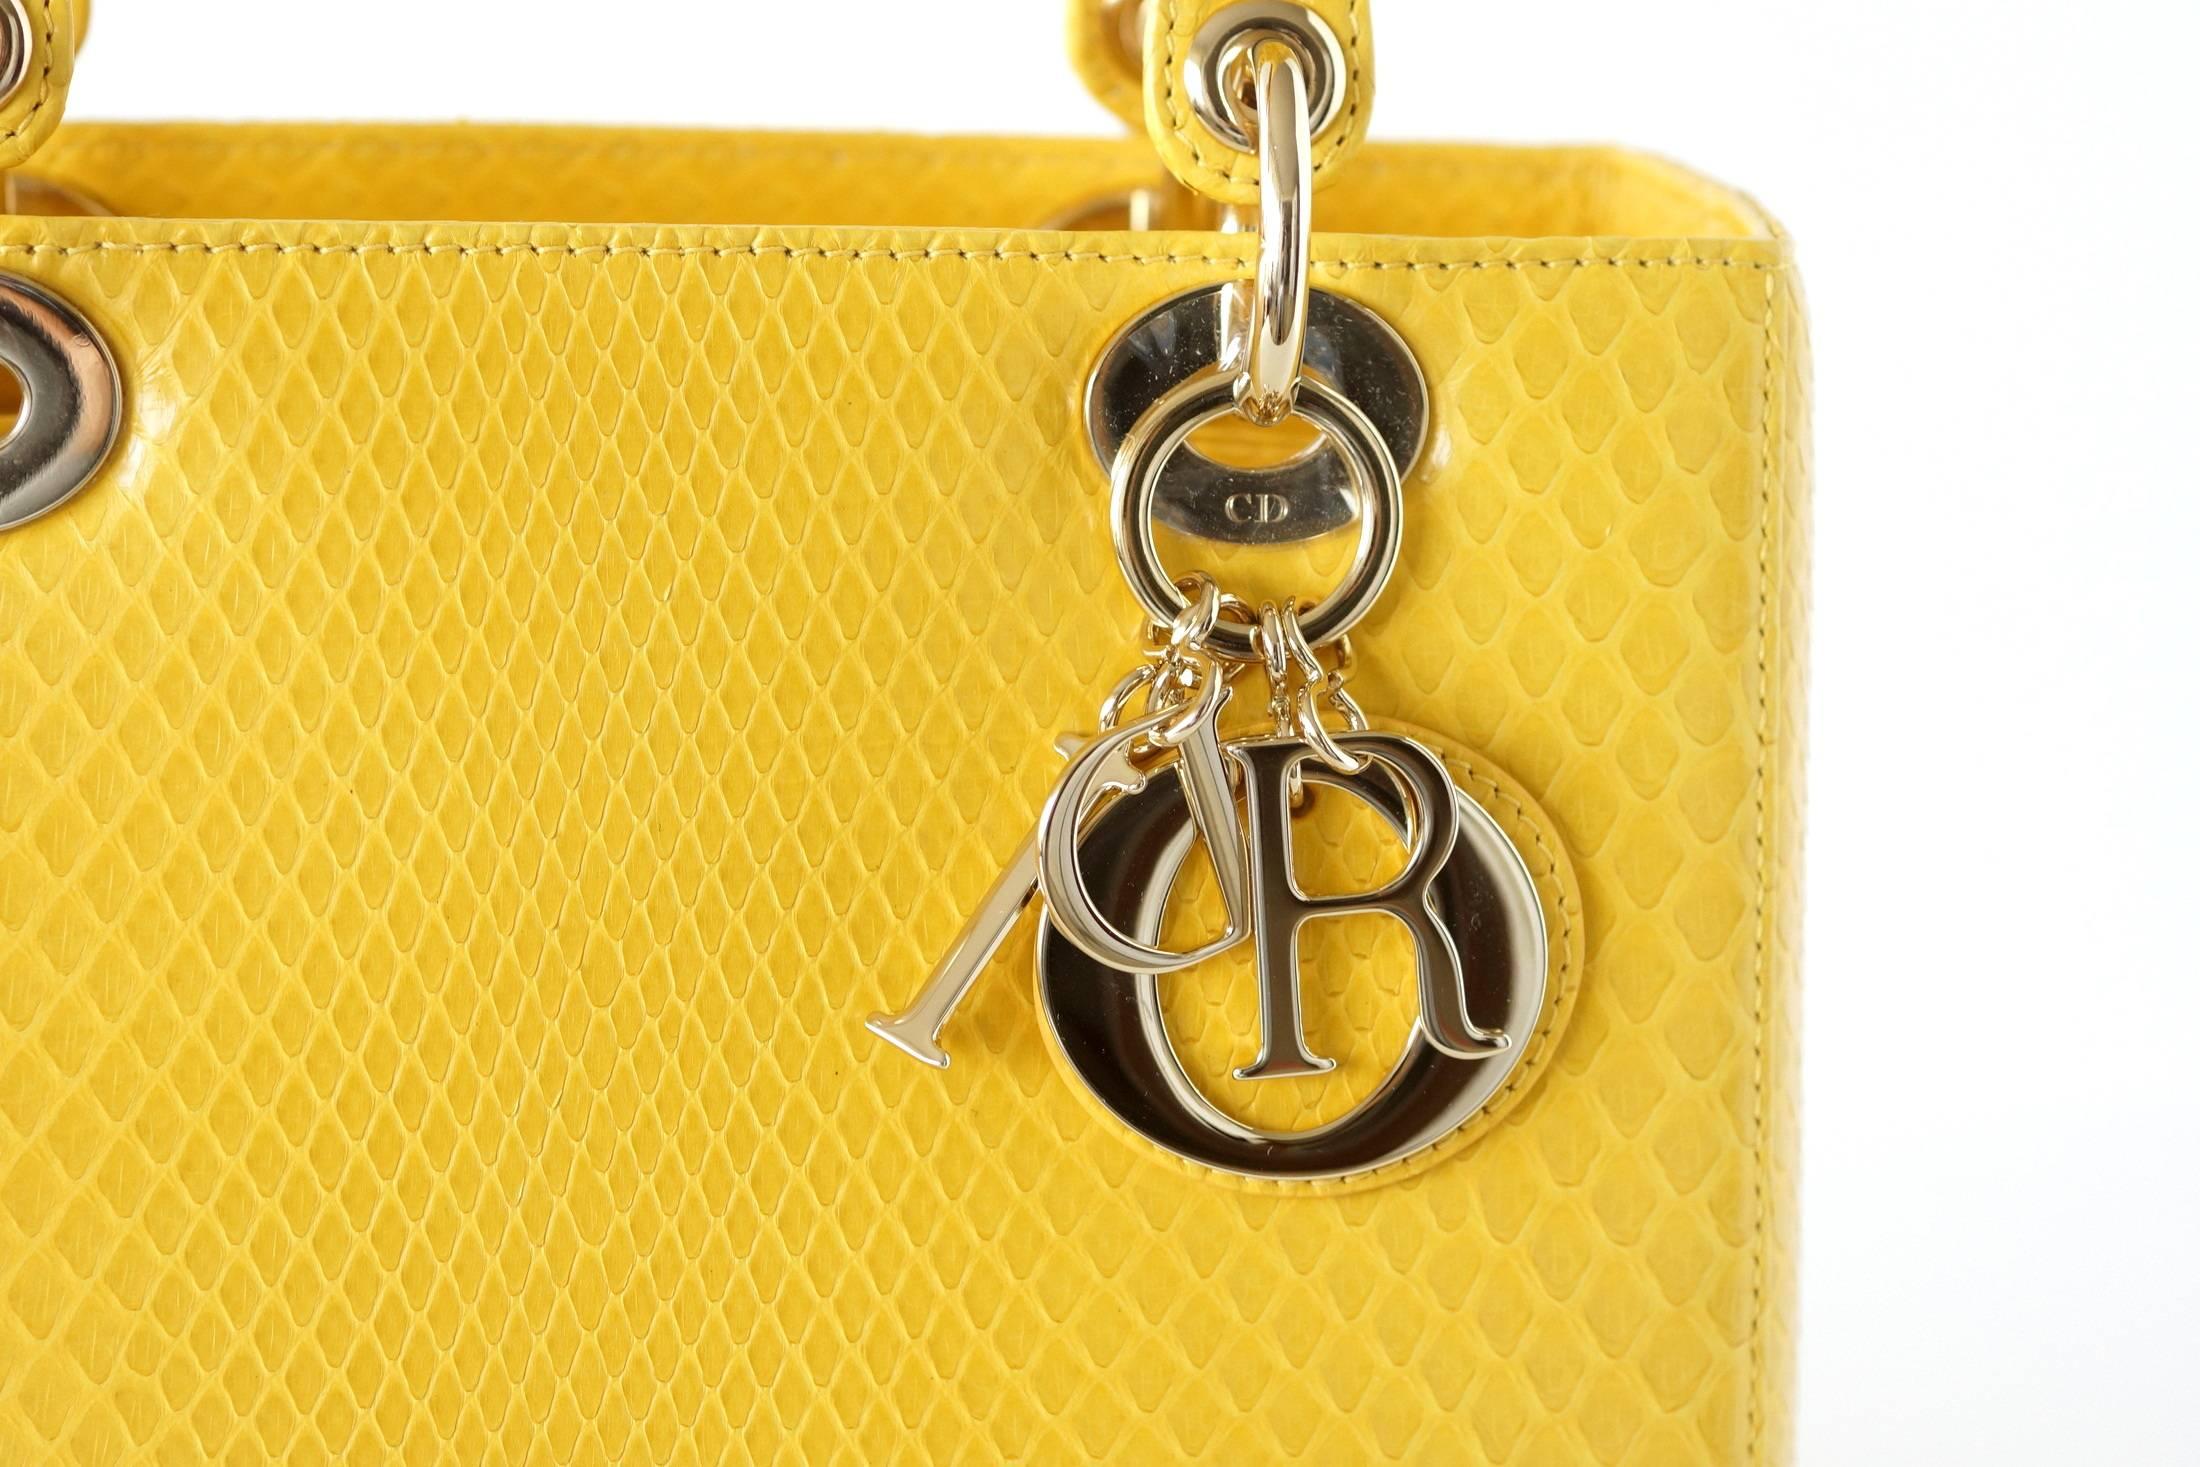 CHRISTIAN DIOR Lady Dior medium beautiful clear yellow snakeskin.
Top hidden zipper.
Signature logo charm.
Interior is zip pocket.
Signature leather plaque inside.
Comes shoulder strap, sleeper, box and all papers.
NEW or NEVER WORN. 
final